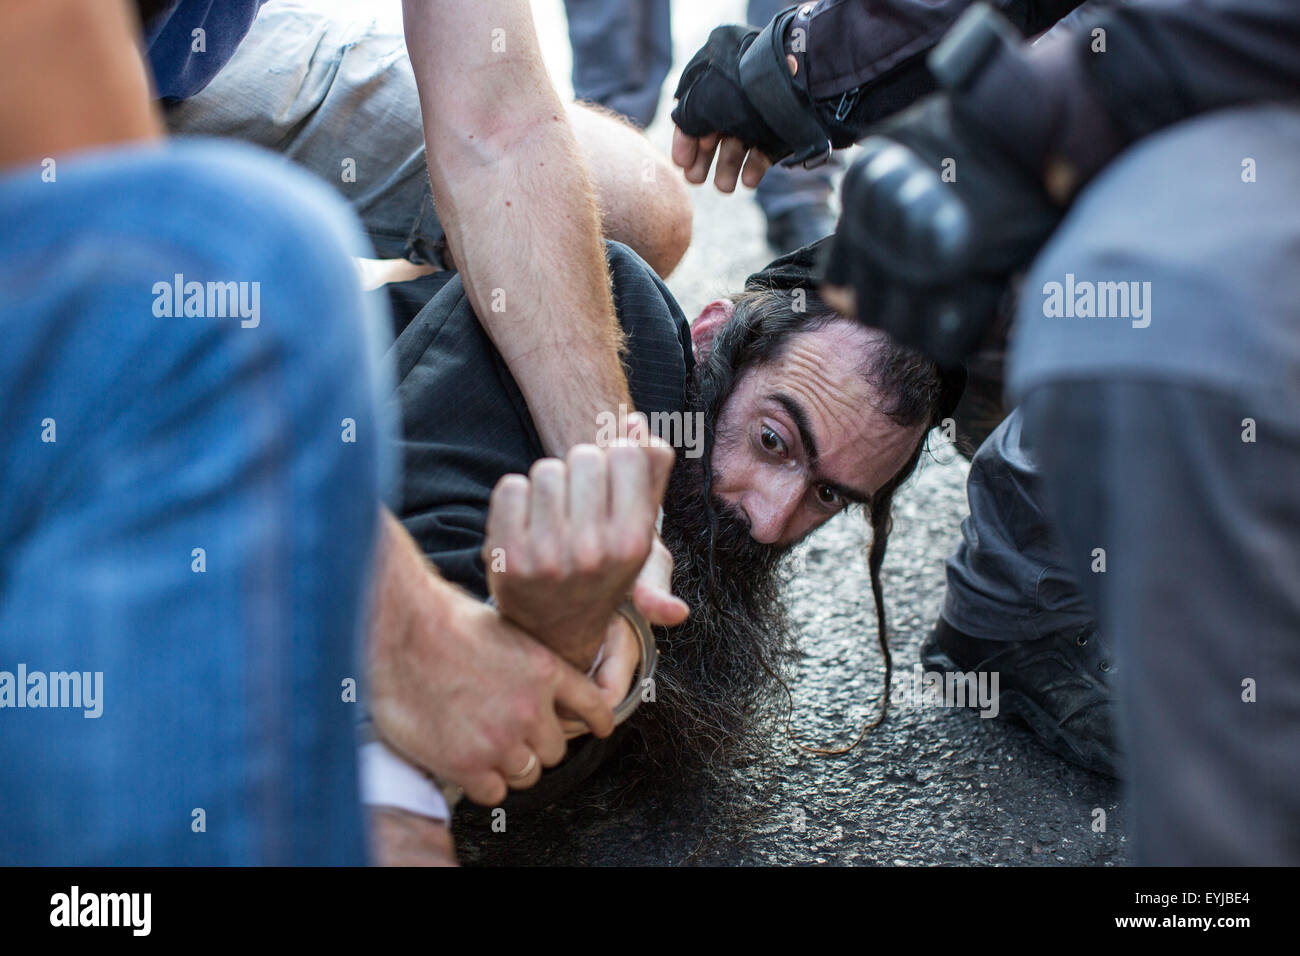 Jerusalem. 30th July, 2015. A Jewish ultra-Orthodox assailant is detained by Israeli police after he stabbed people during the annual gay pride parade in Jerusalem, . Six people were stabbed at Jerusalem's annual gay pride parade on Thursday, in one of the gravest attacks on the gay community in Israel, Israeli officials and eyewitnesses told Xinhua. A police spokesperson said the assailant was captured and identified as Yishai Schlissel, a Jewish ultra-Orthodox man who carried out a similar attack in 2005, injuring three people. Credit:  Xinhua/Alamy Live News Stock Photo